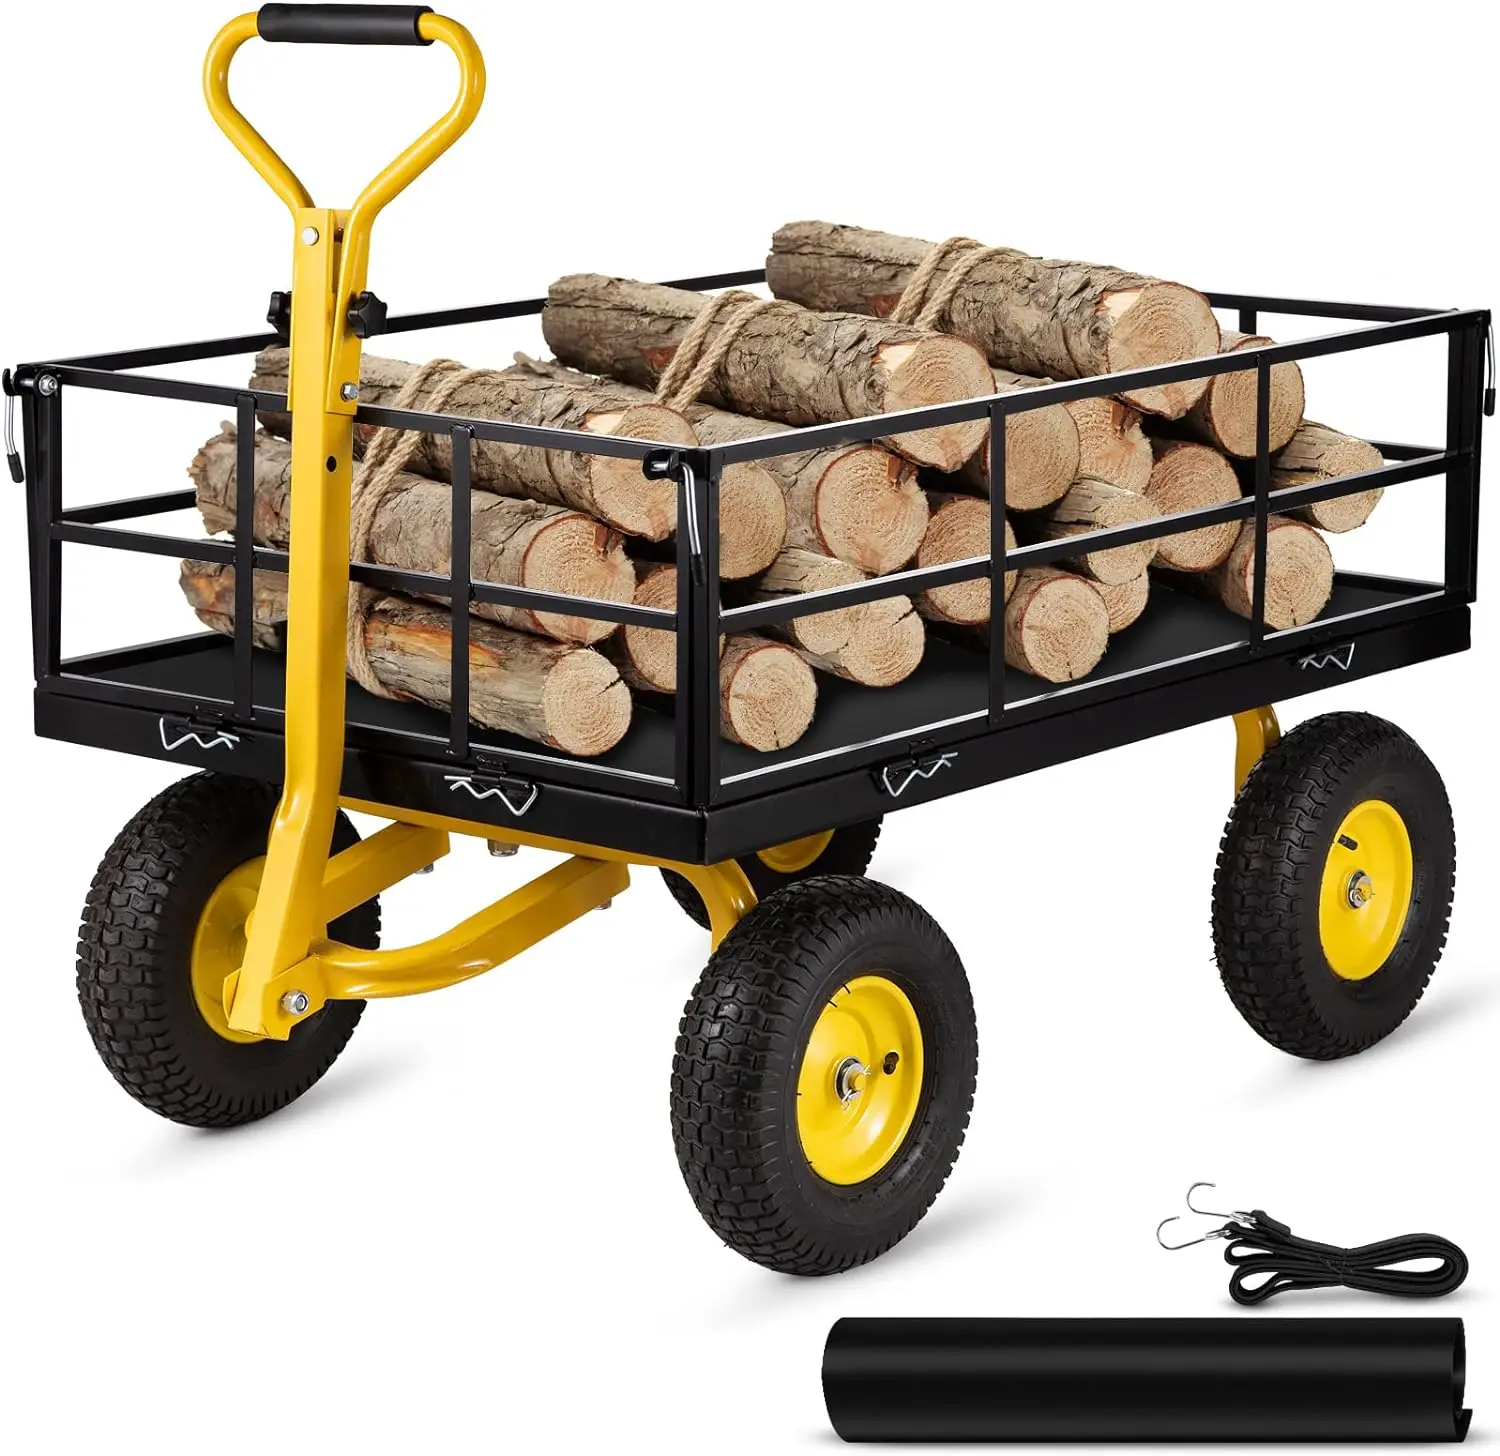 

Steel Garden Cart, Heavy Duty 1200 Lbs Capacity, with Removable Mesh Sides To Convert Into Flatbed, Utility Metal Wagon USA